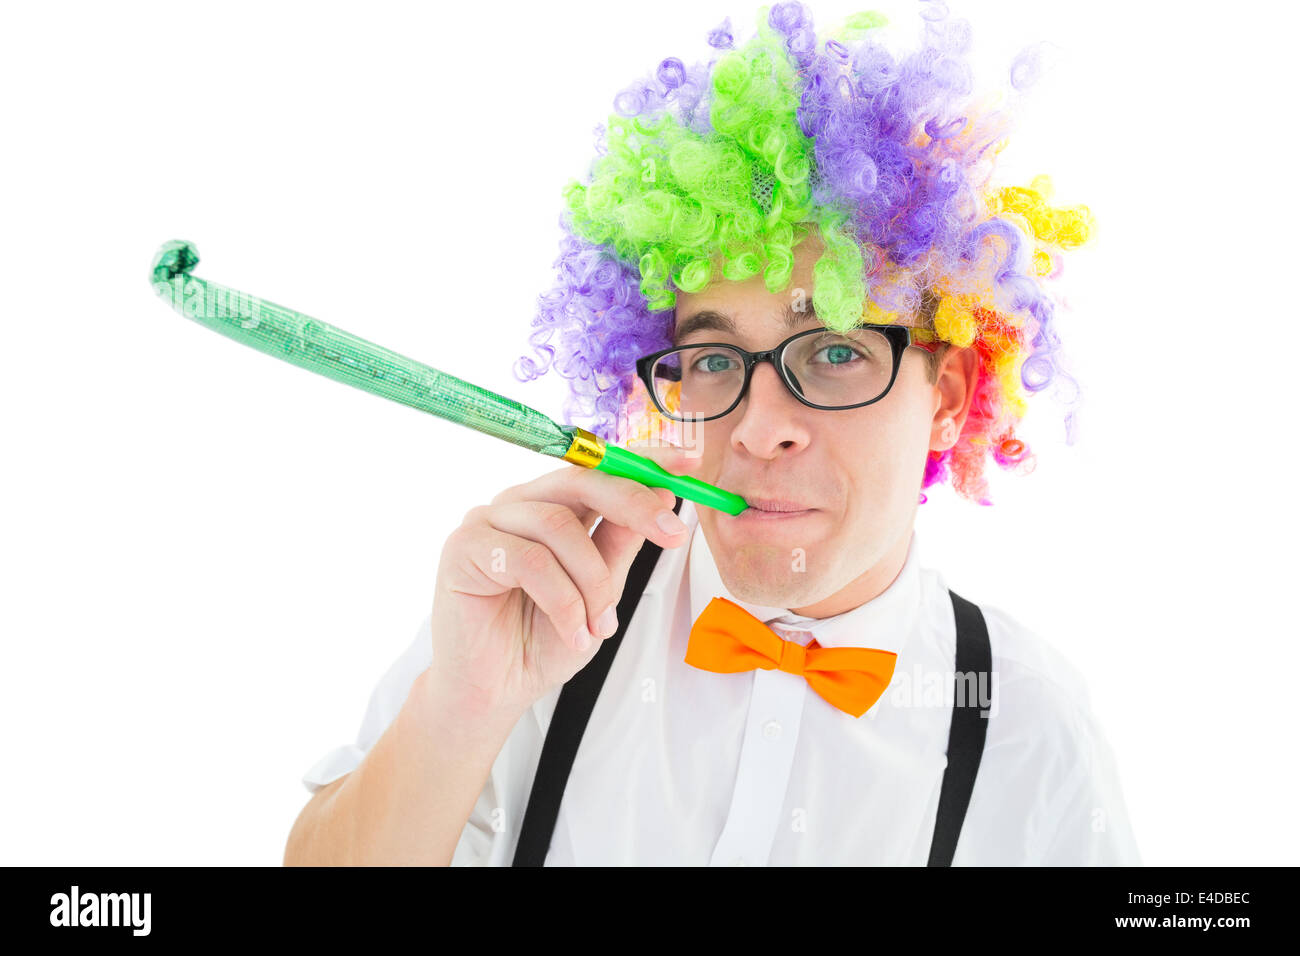 Geeky hipster wearing a rainbow wig blowing party horn Stock Photo